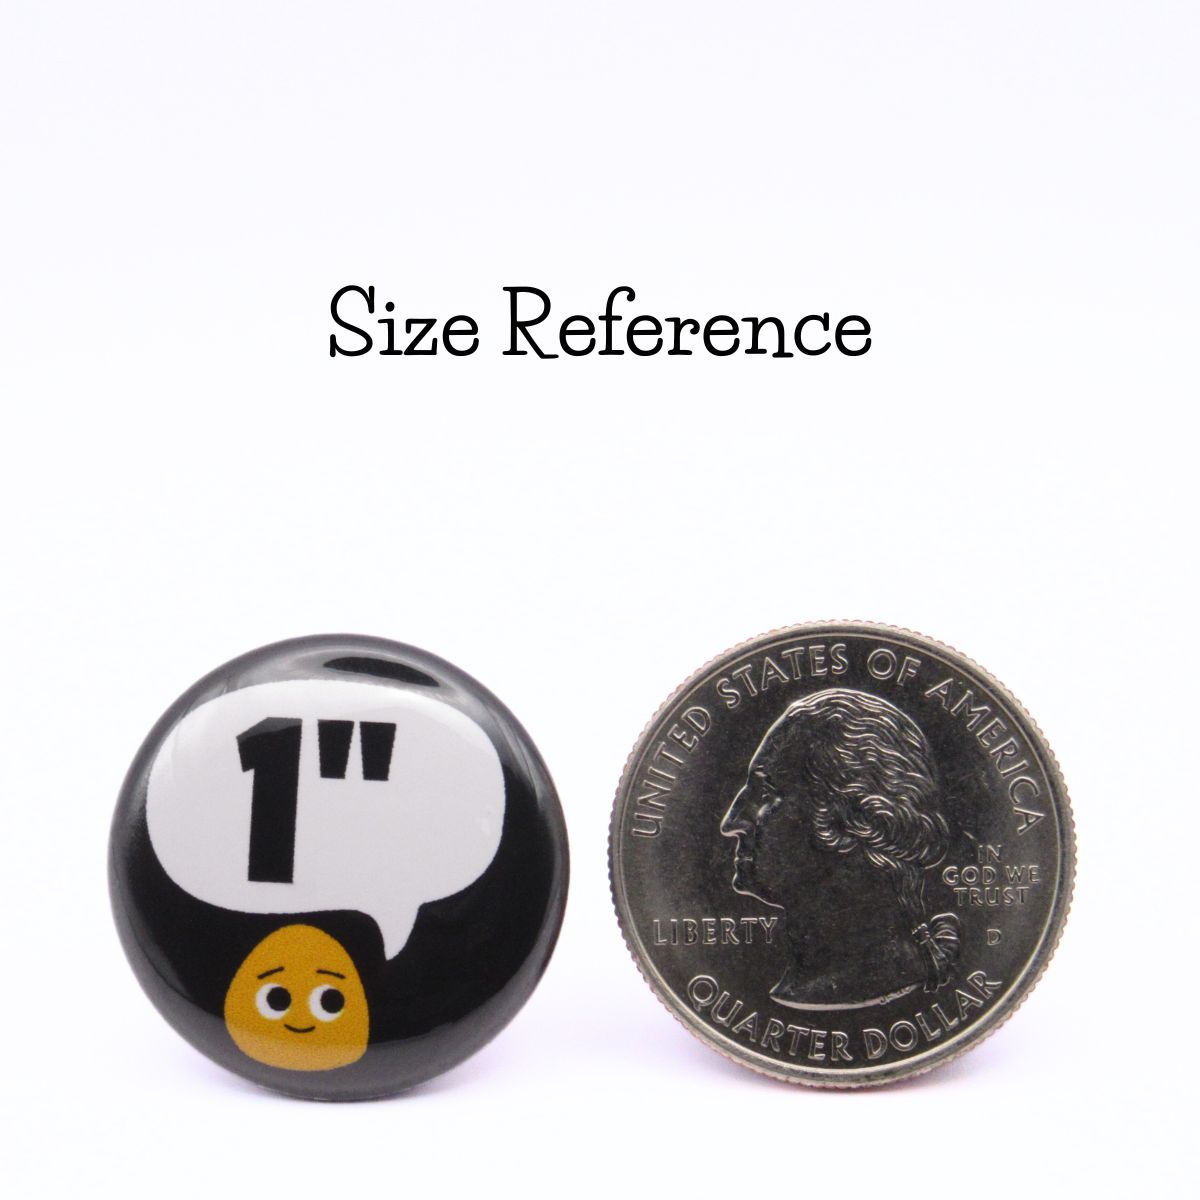 BooBooRoo pinback button (i.e. button, badge, pin) showing relative size of 1 inch button